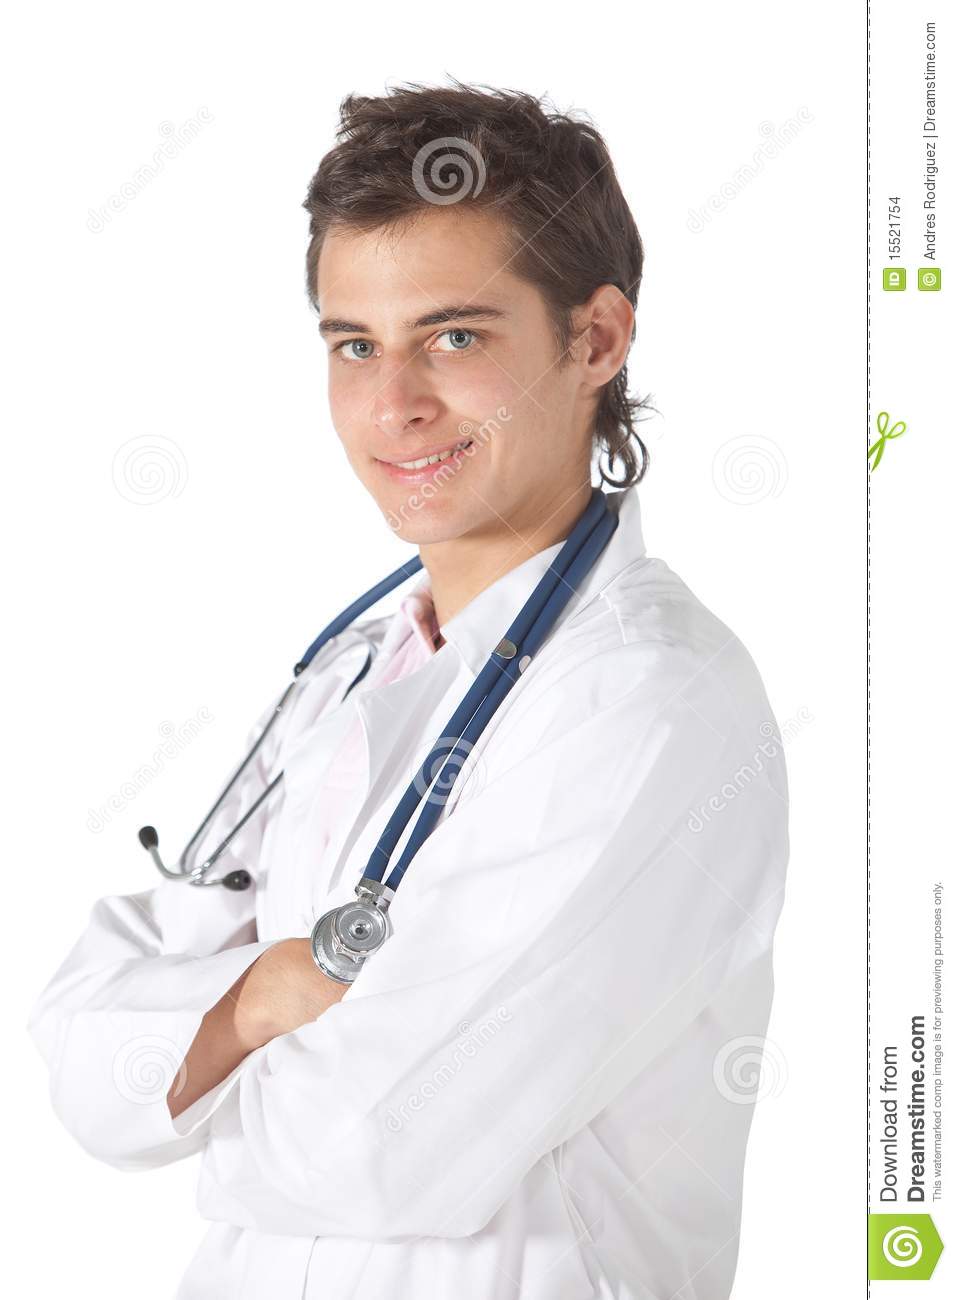 Young Male Doctor With Arms Crossed   Isolated Over A White Background    